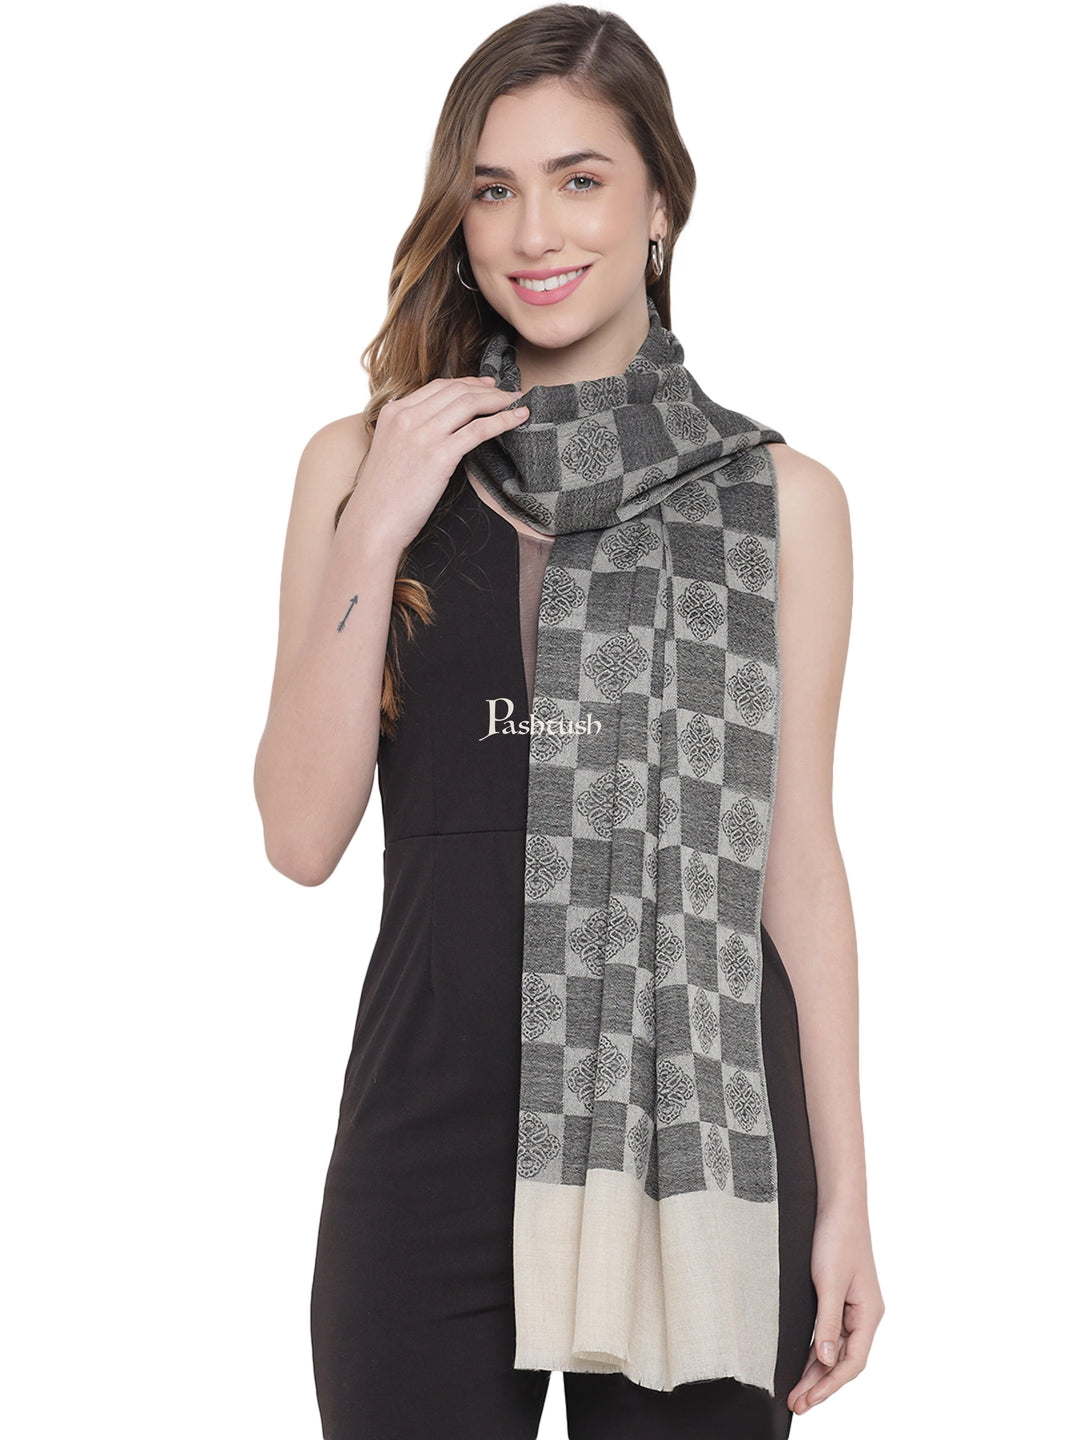 Pashtush India Womens Stoles and Scarves Scarf Pashtush Womens Fine Wool Stole, Checkered Weave, Soft and Warm, Black